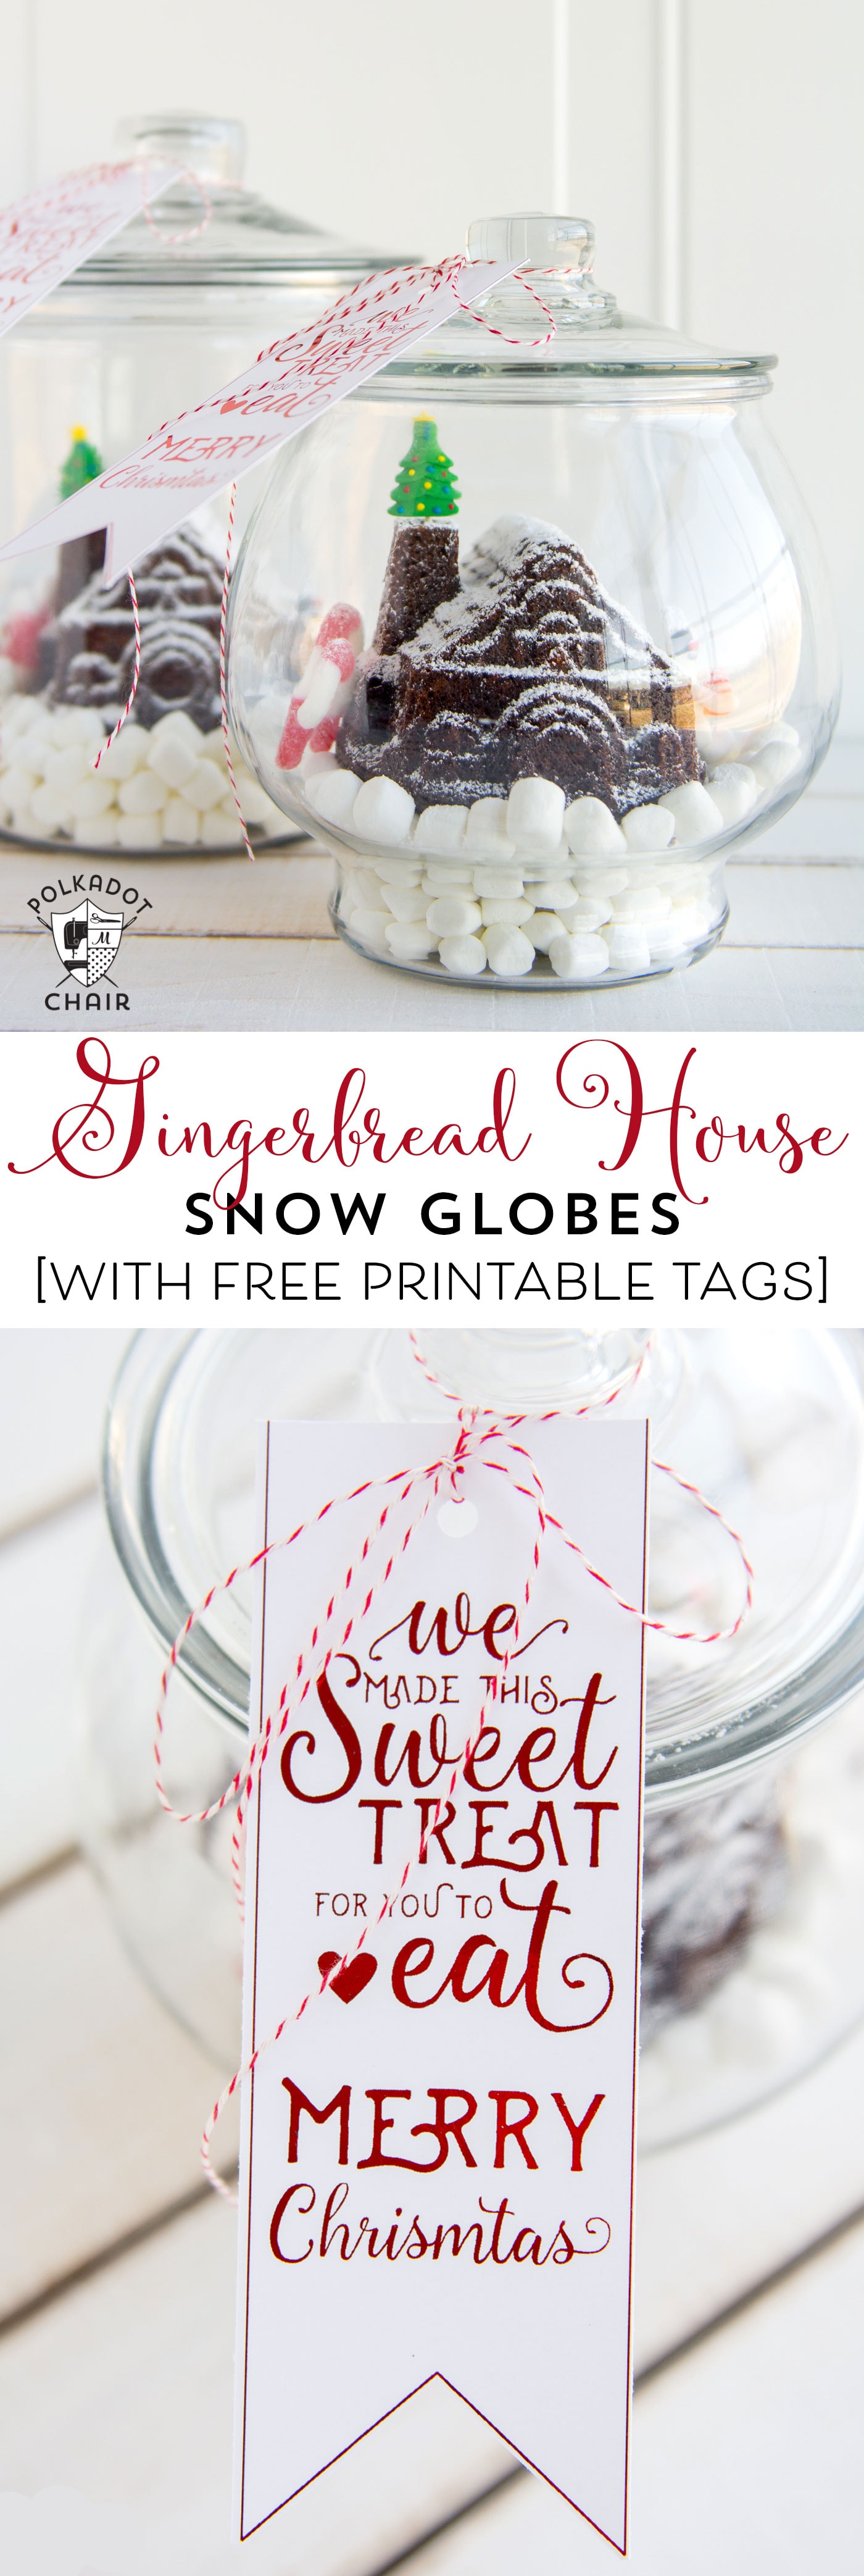 Cute DIY Gingerbread House Snow Globes and Free Printable